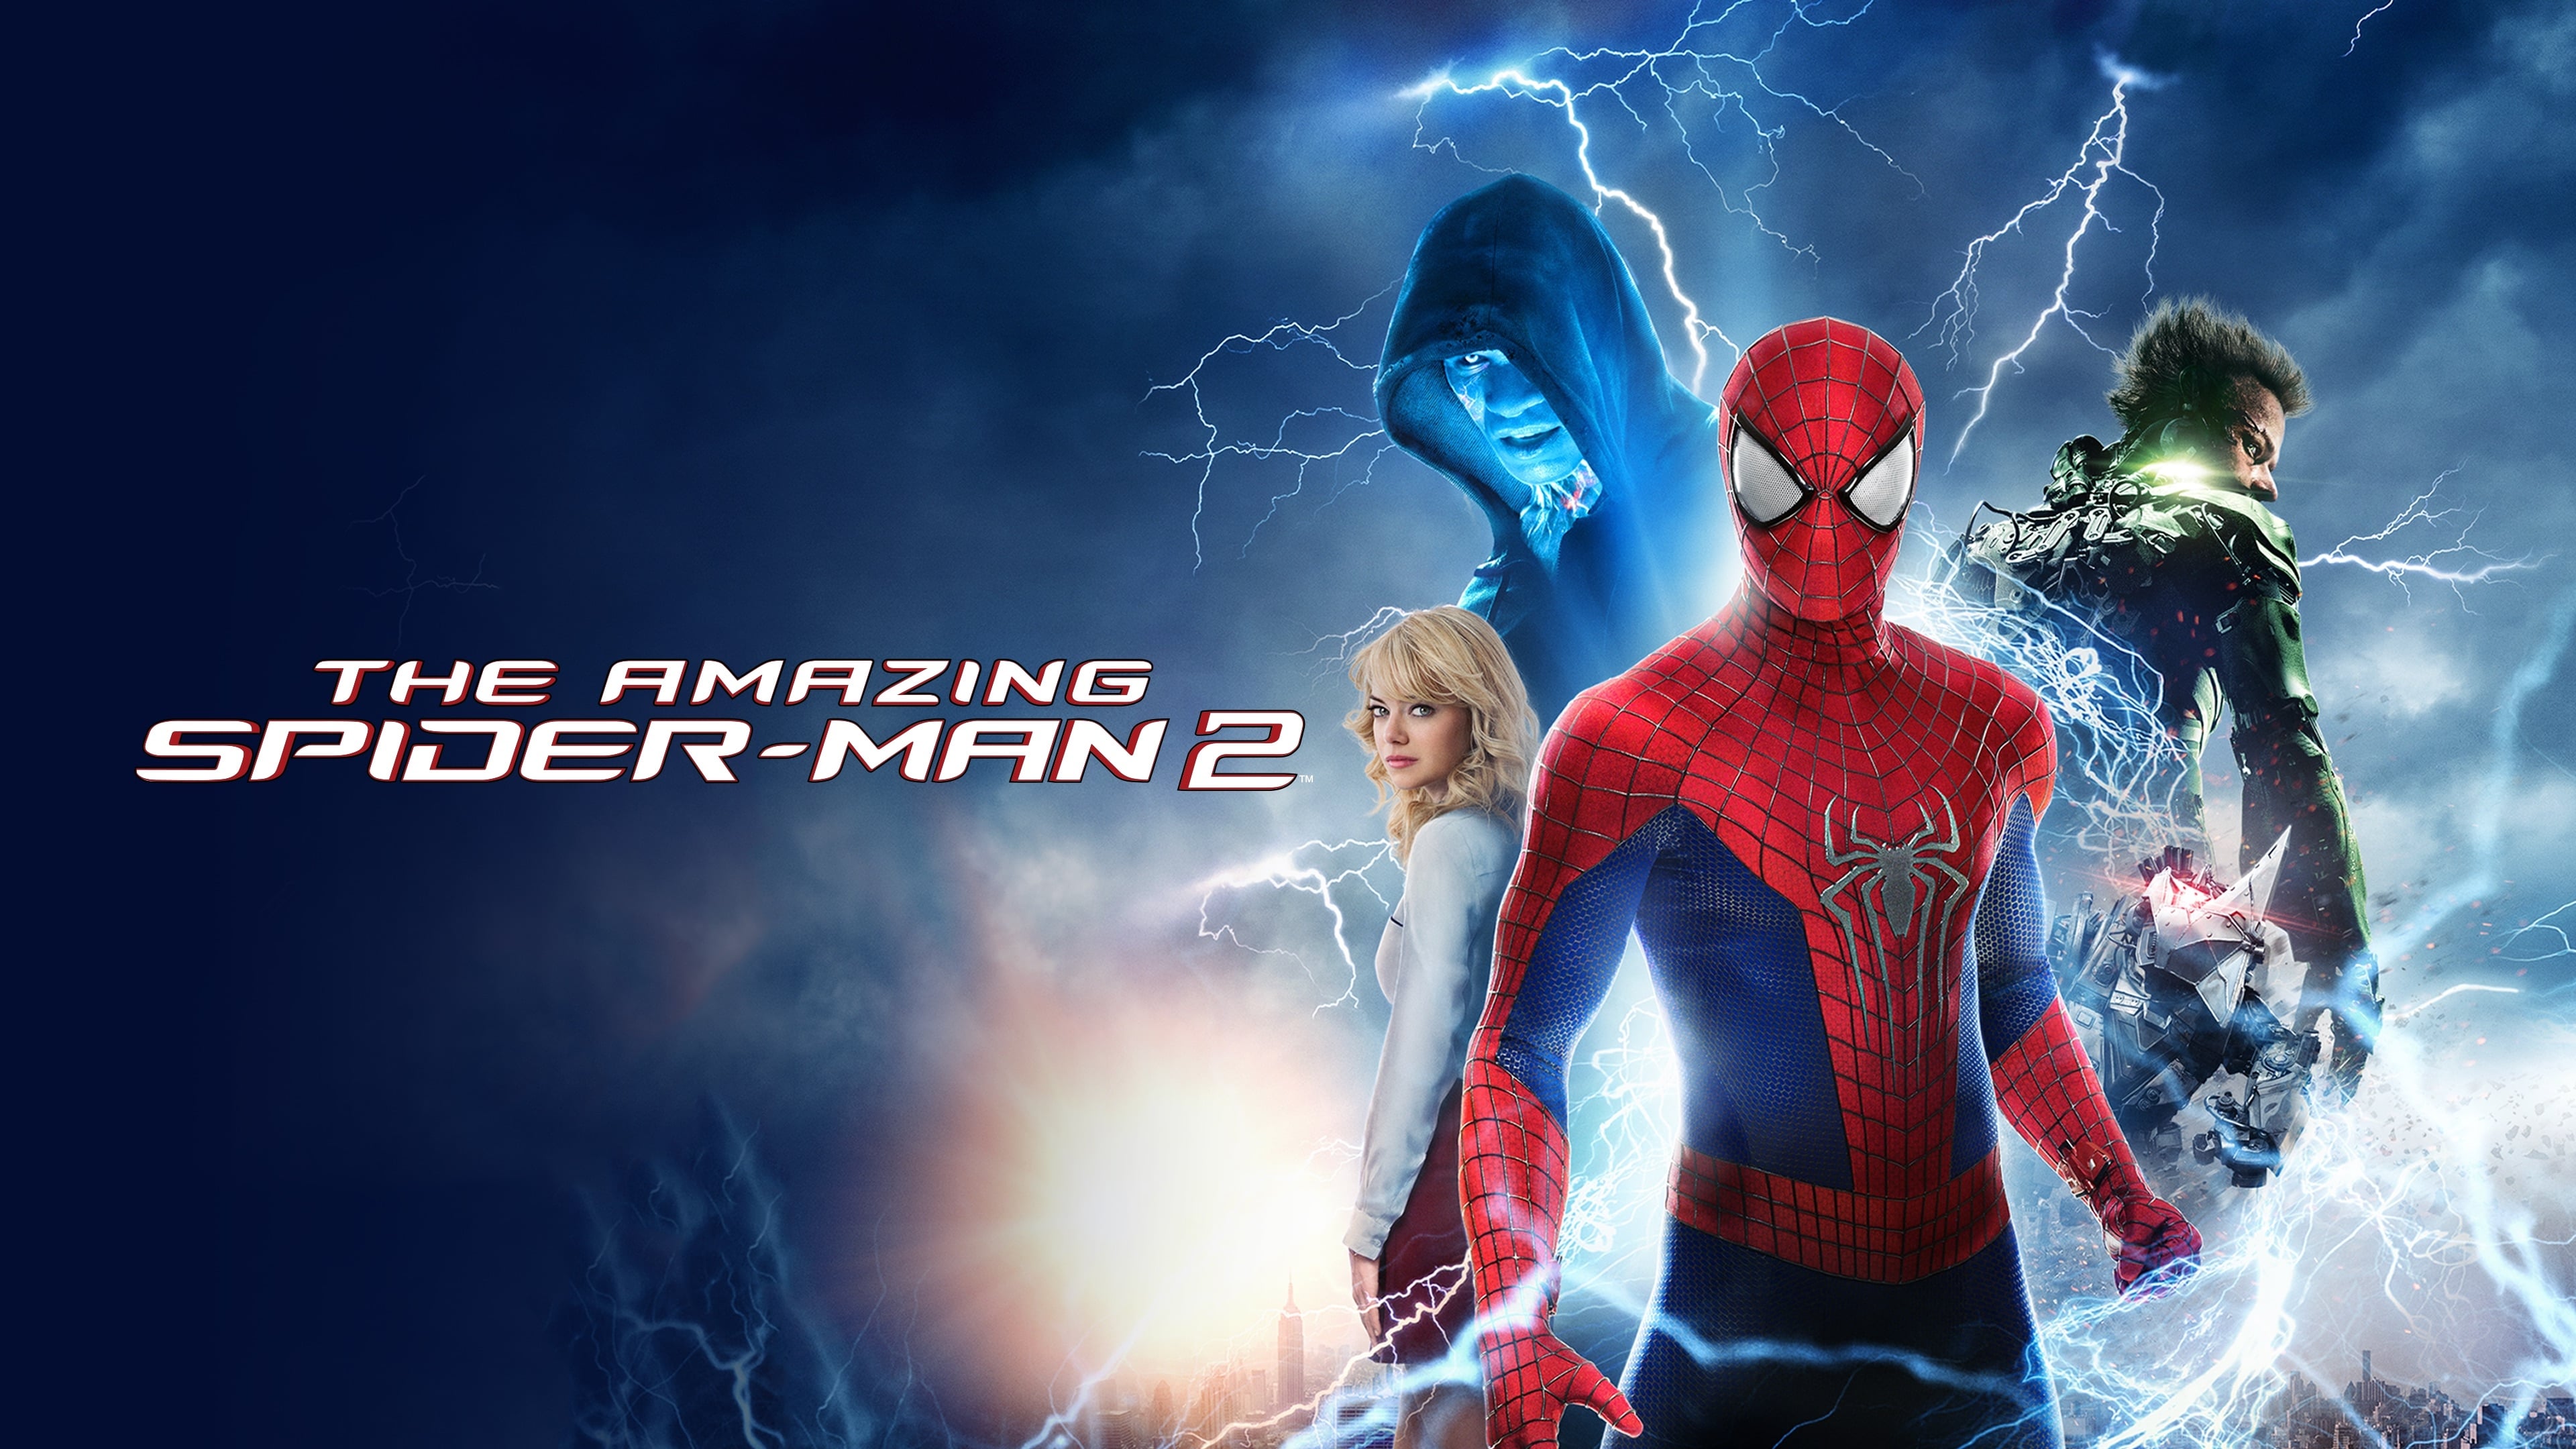 Spider Man Peter Parker Andrew Garfield Gwen Stacy Emma Stone Electro Spider Man Max Dillon Harry Os 3840x2160